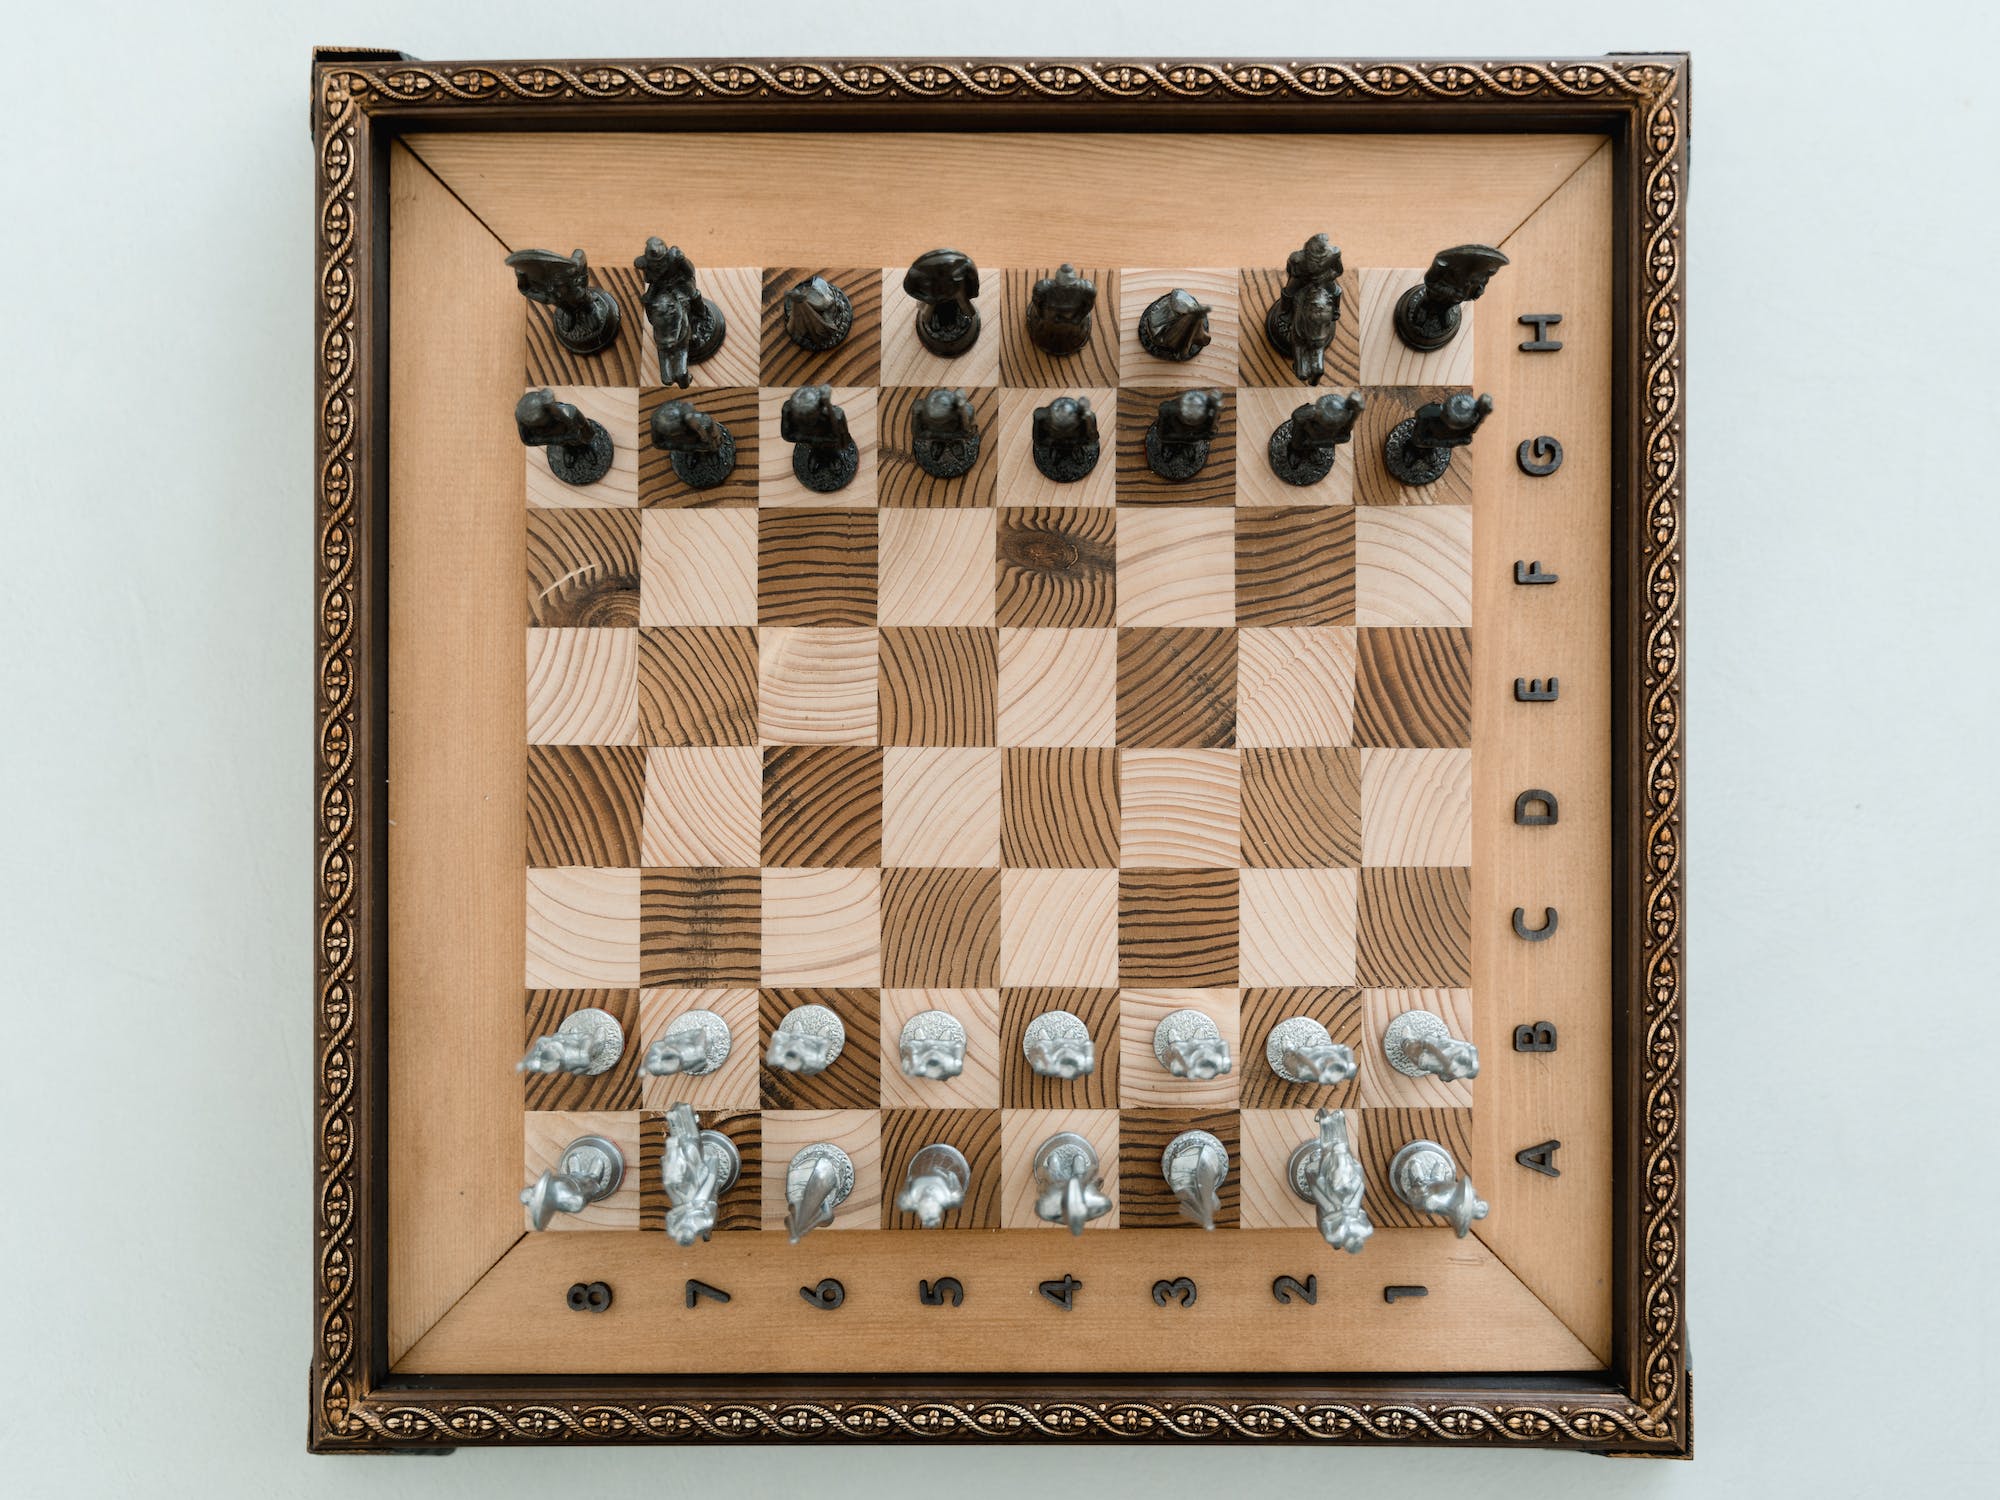 5 Ways to achieve your pawn-structure objectives –